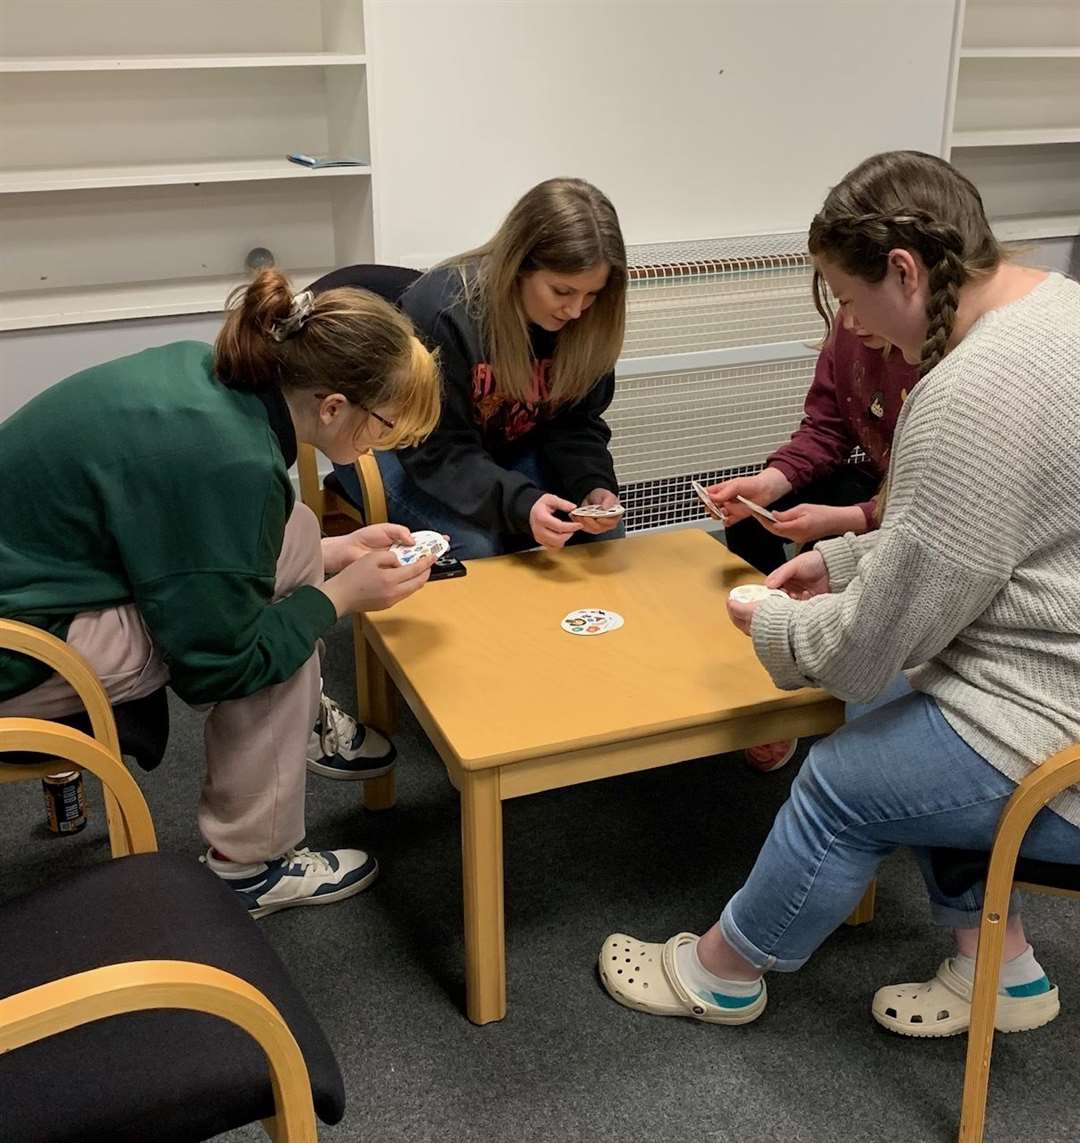 Youth worker Megan Penny, right, plays a game with Molly Gibbard, Rhionna Mackay and another young person.